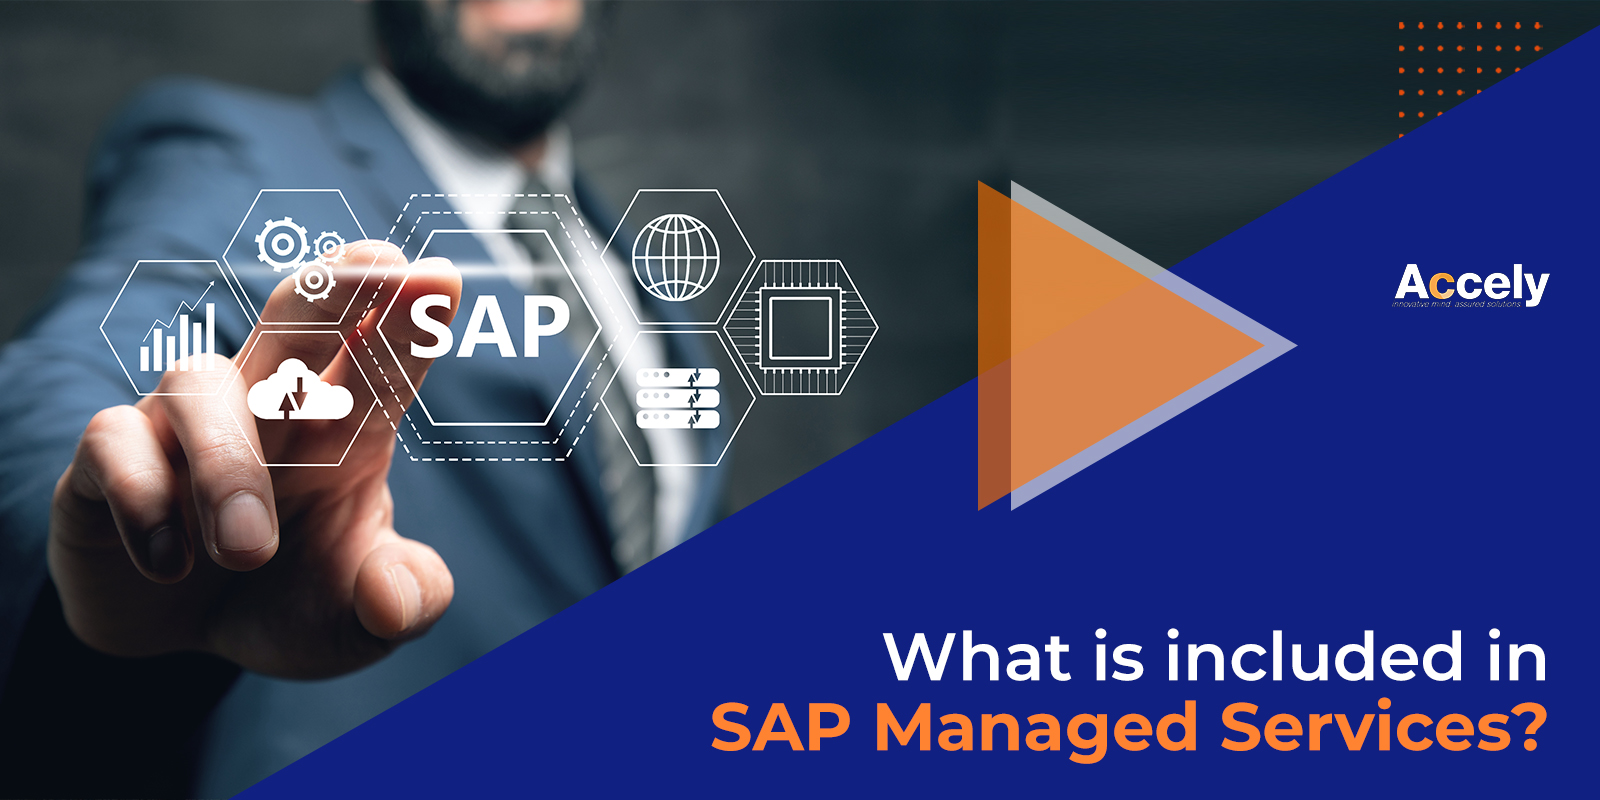 What Is Included In SAP Managed Services?